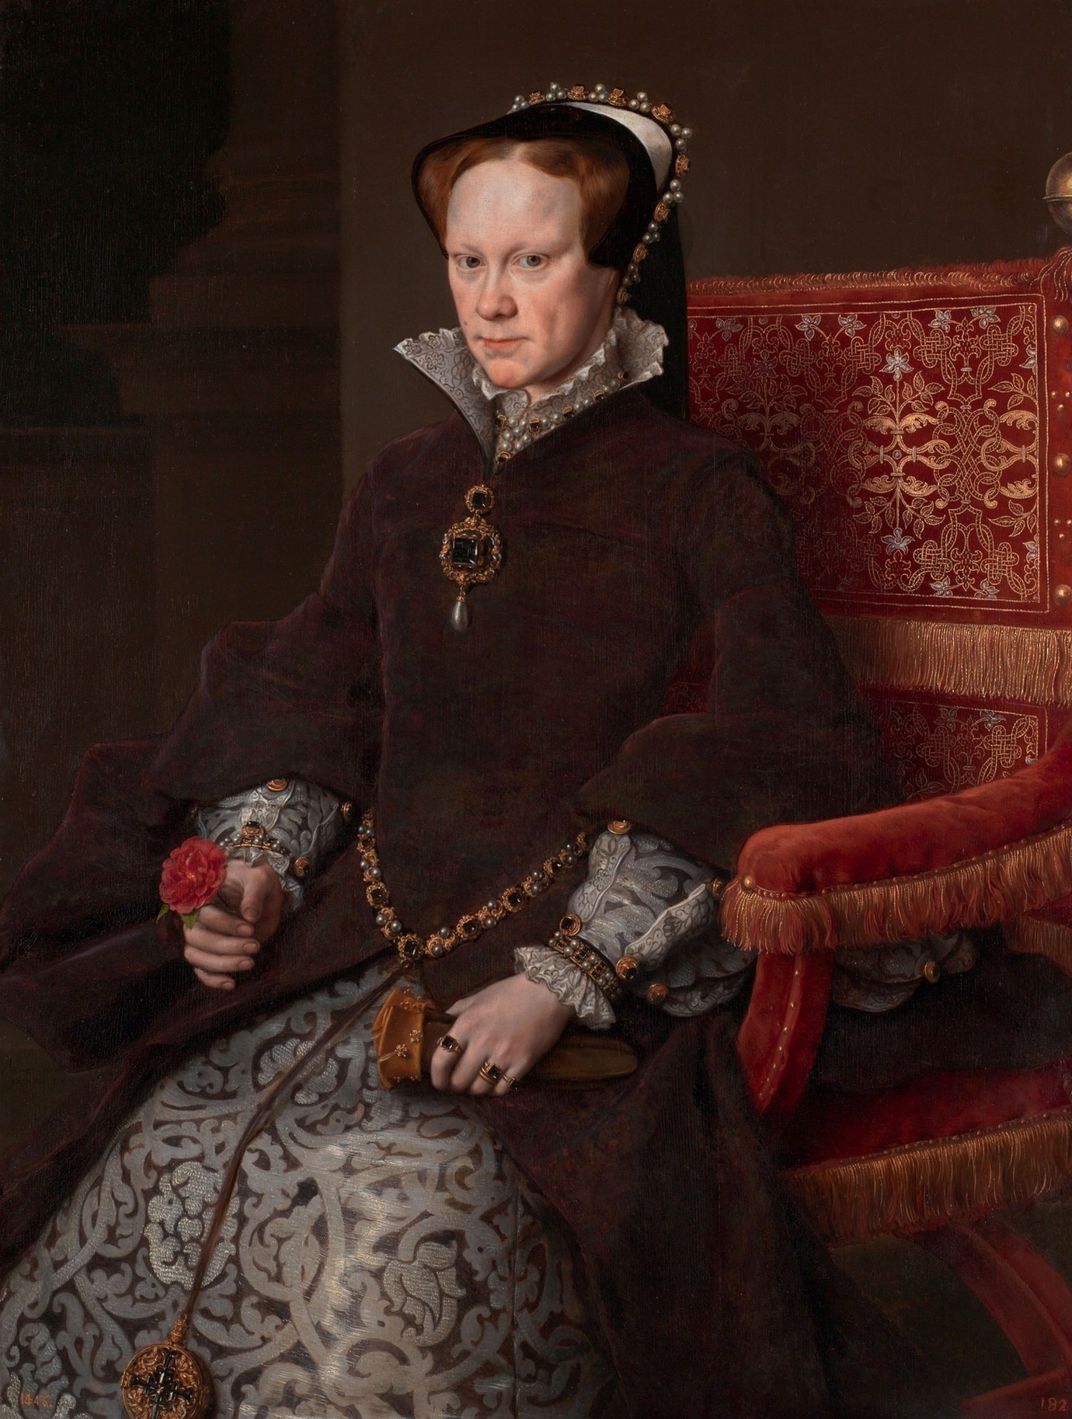 A less idealized 1554 portrait of Mary I by Antonis Mor